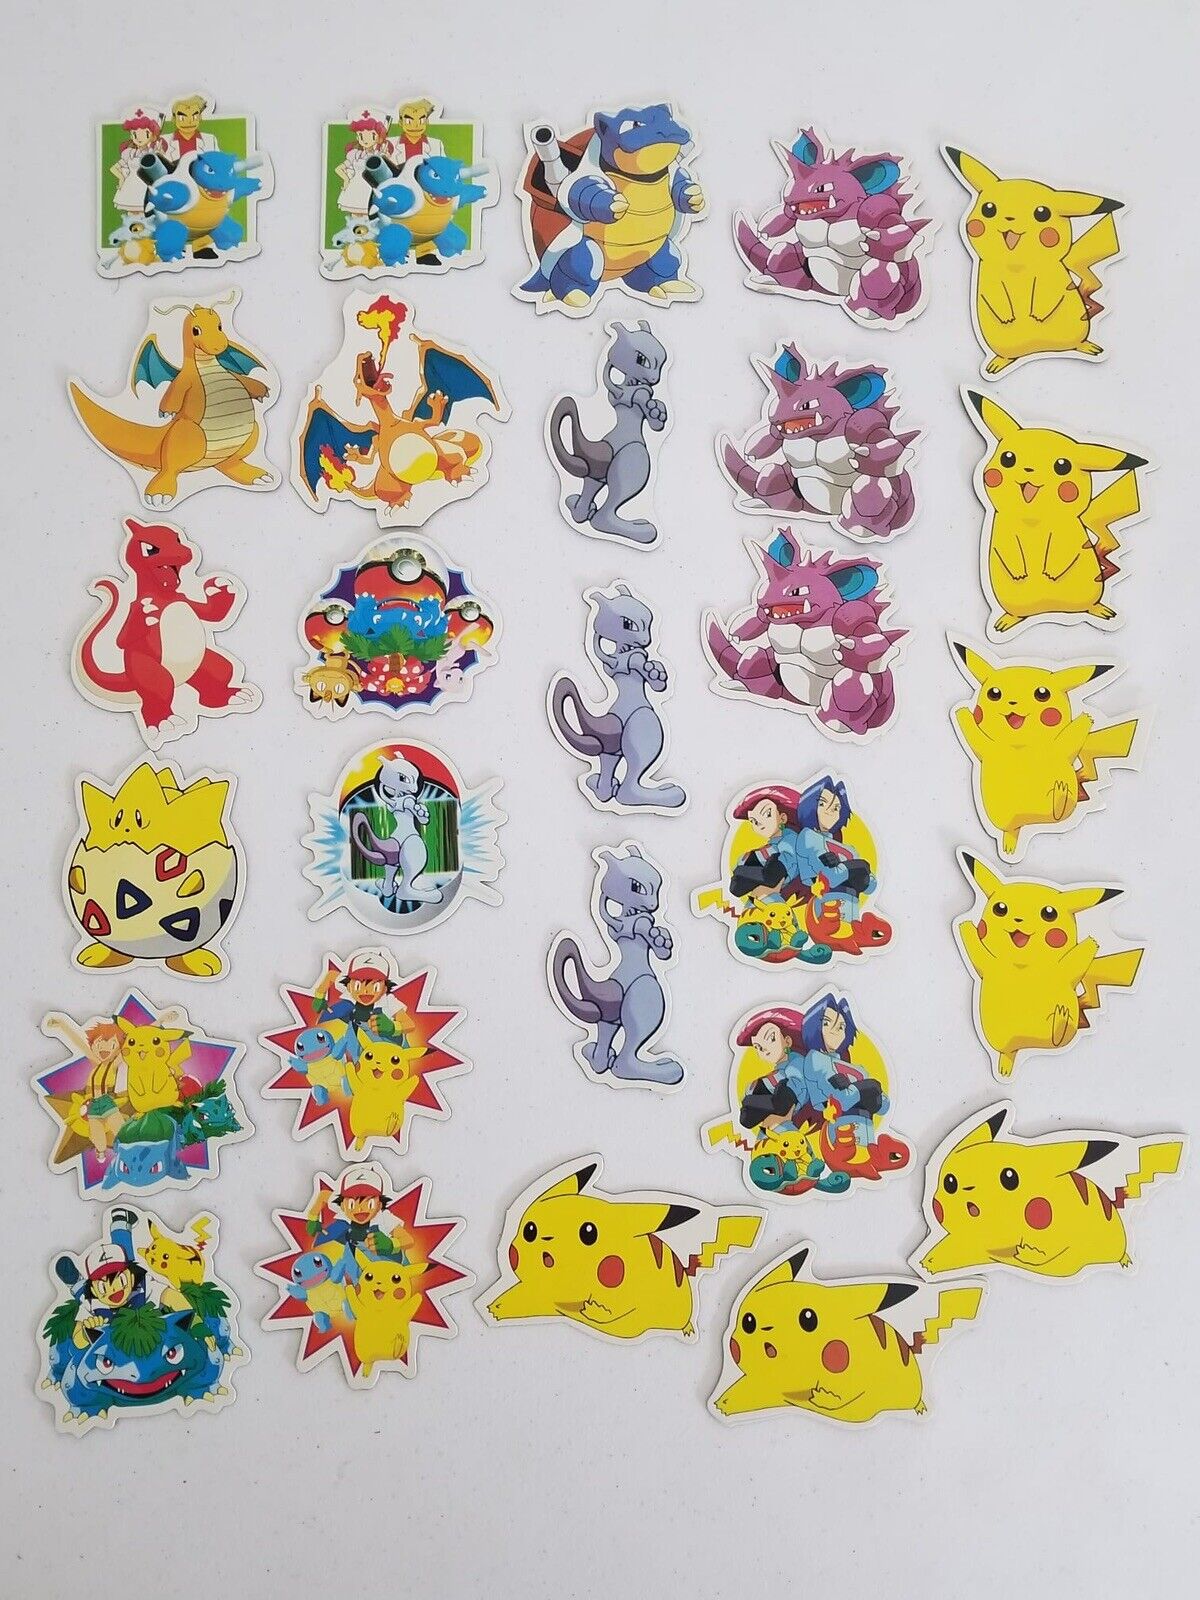 Vintage 1990s Pokemon Magnets Collection - 30pc Lot featuring Pikachu, Charizard, Mewtwo - 3-4" Size - TreasuTiques